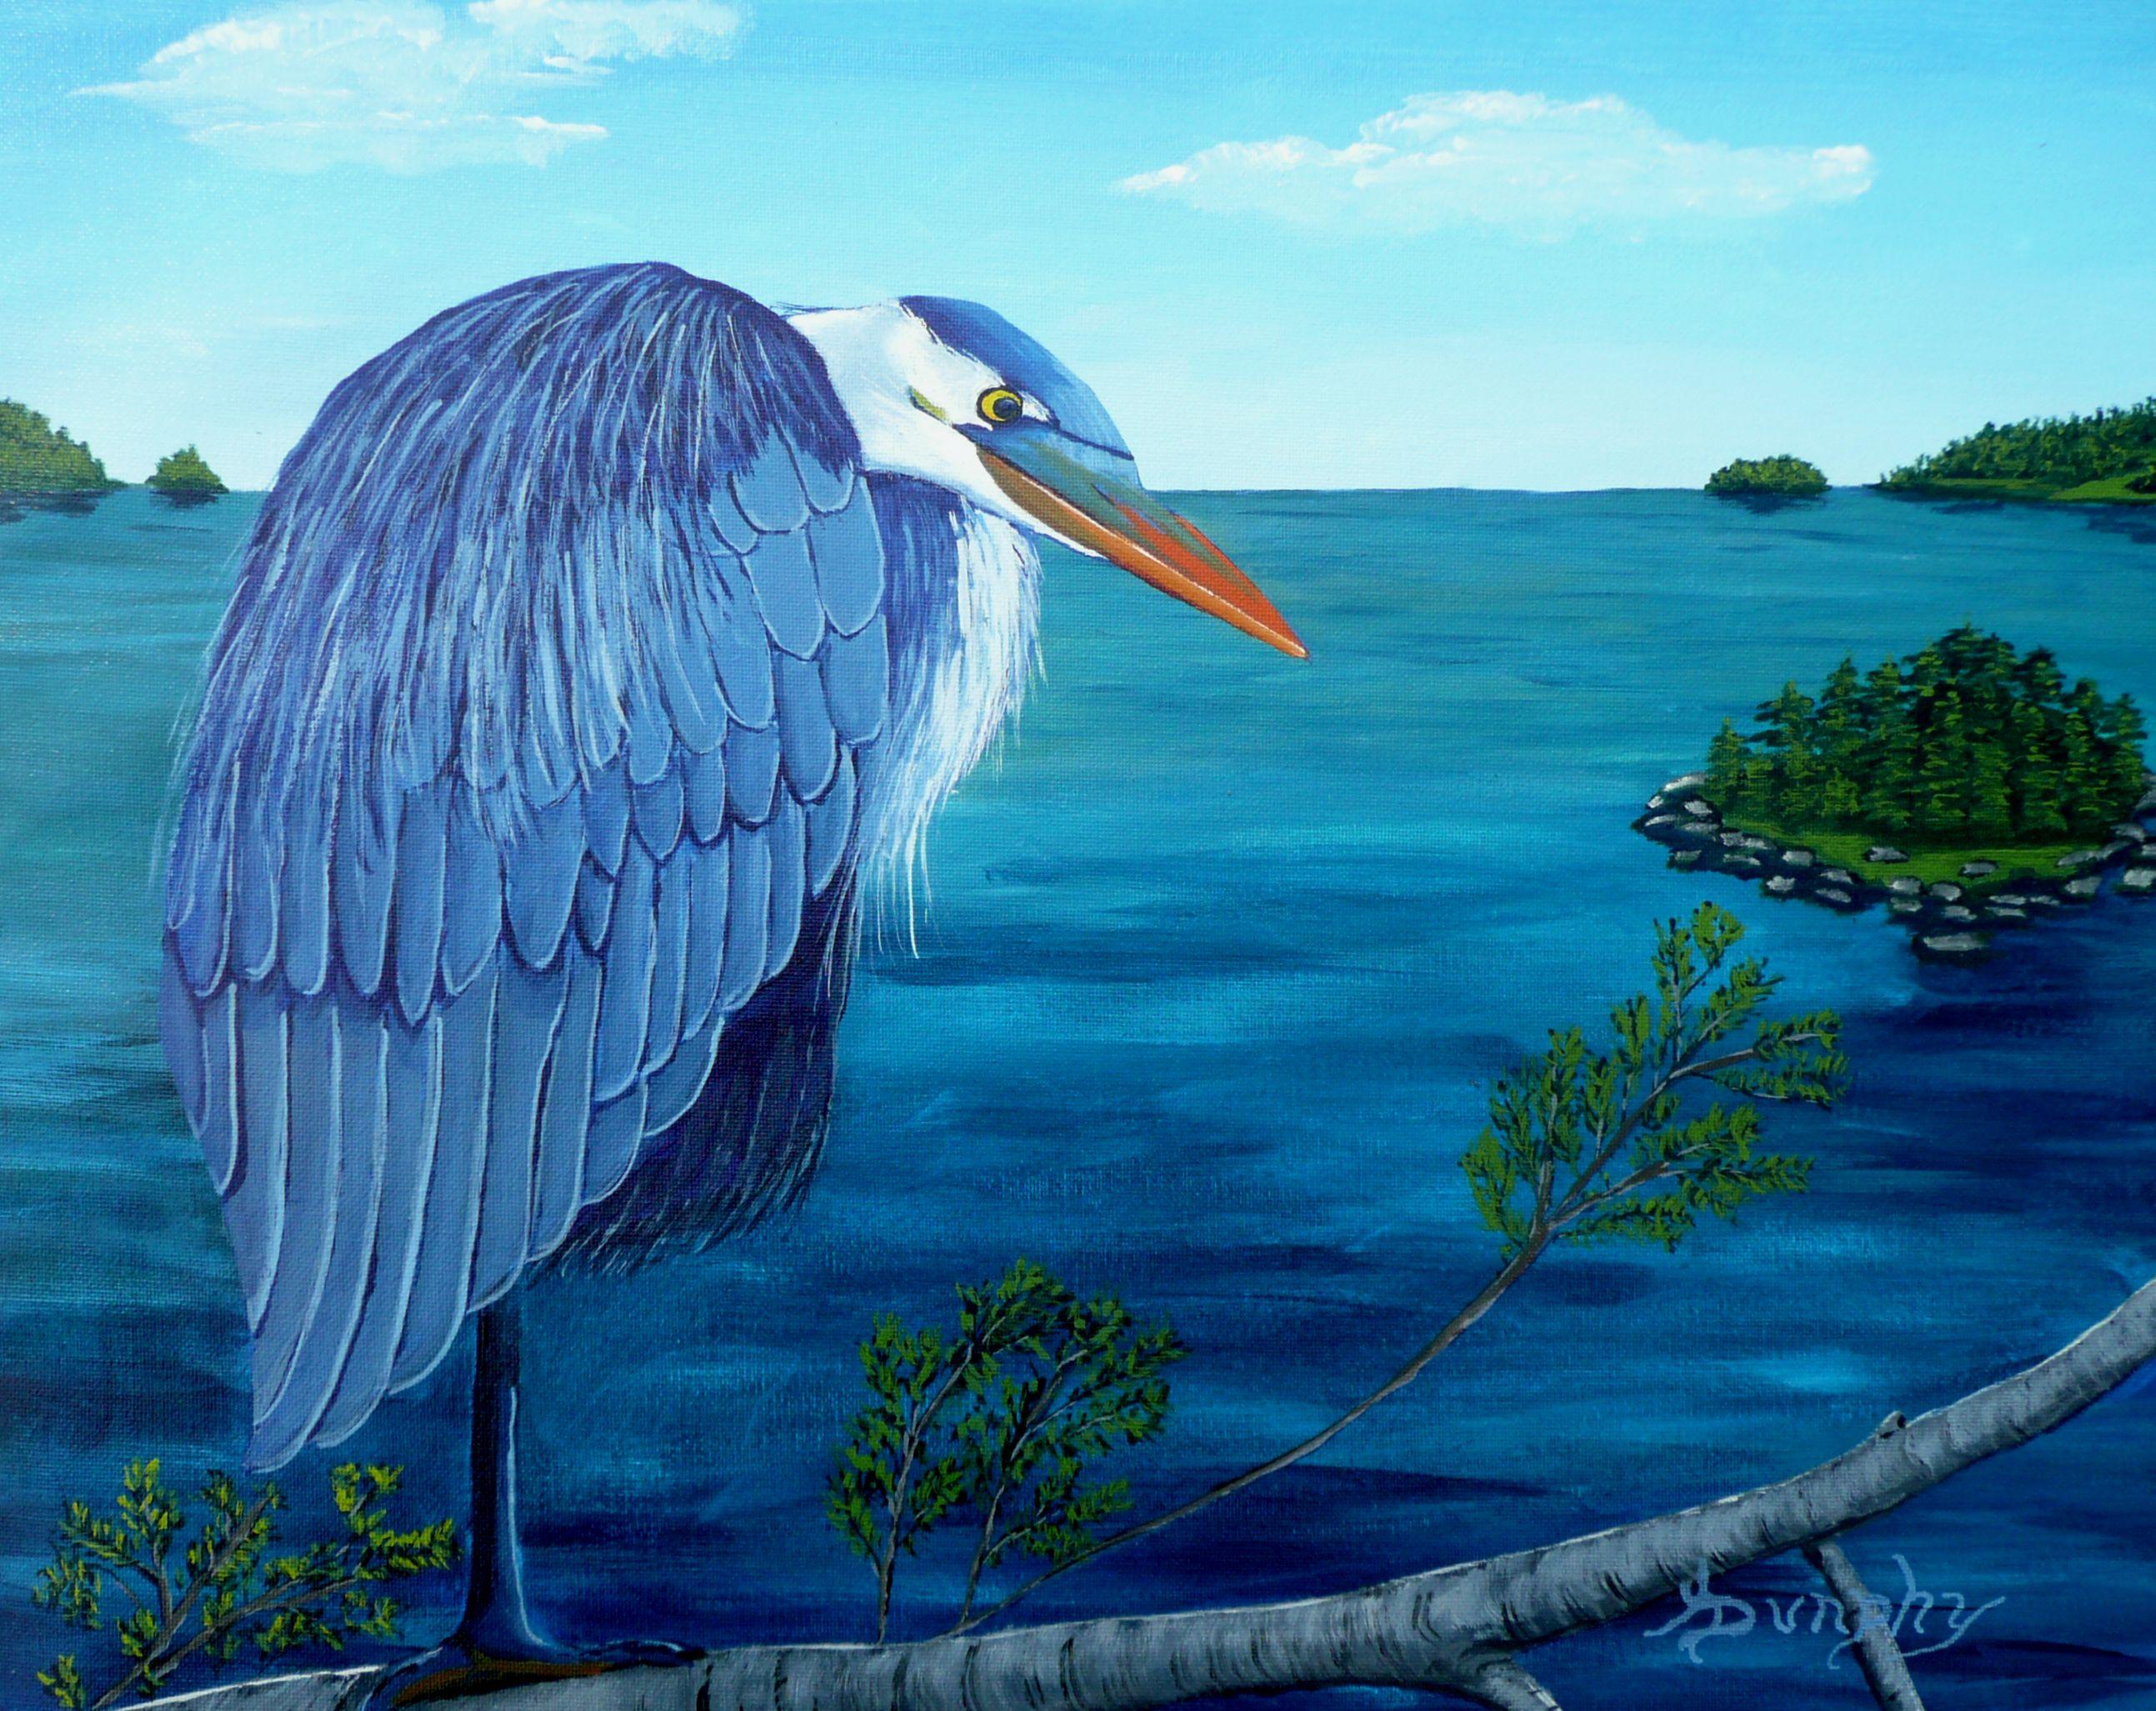 On the Pacific Northwest coast of Canada and America you can fine these magnificent birds. The blue coloring helps the bird blend in with the land and sea. This nature painting has been created using only professional grade acrylics on un-stretched